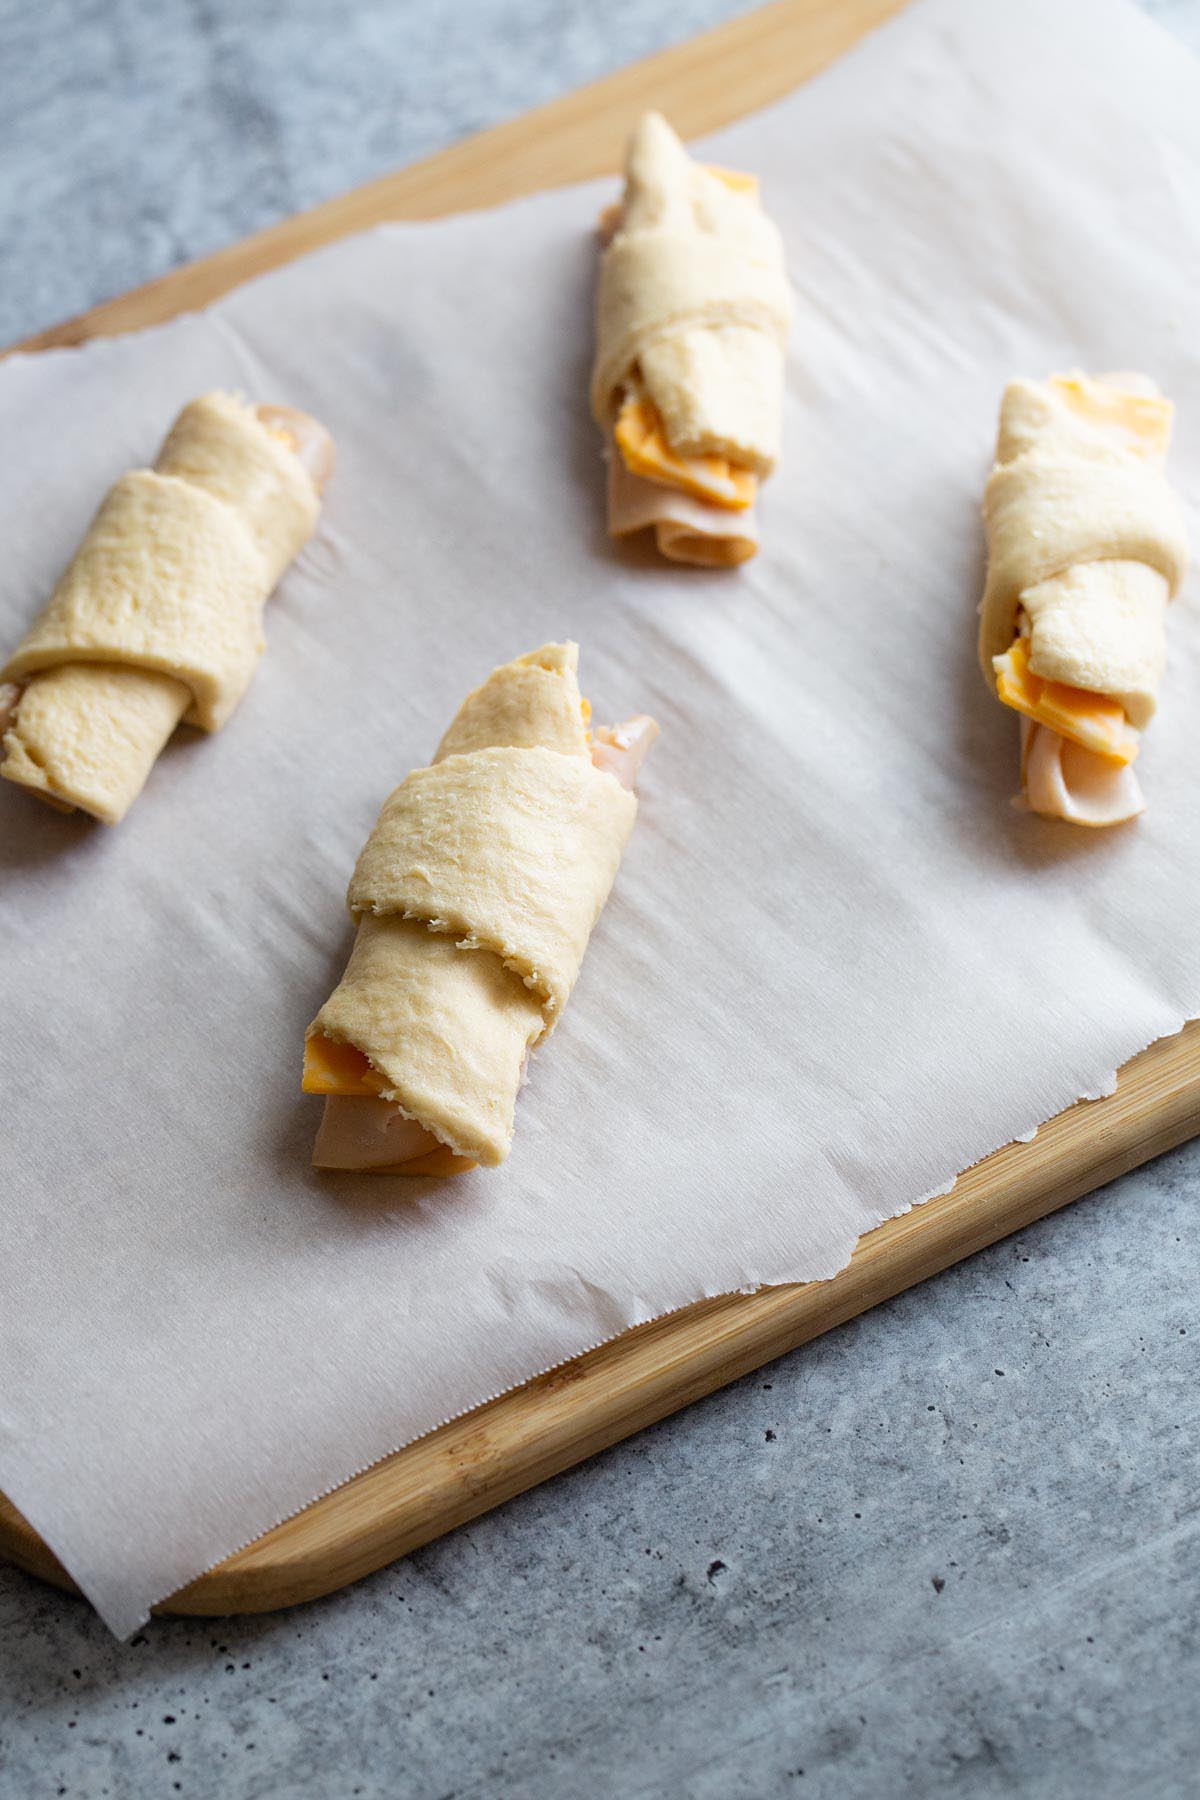 Rolled up uncooked crescent rolls.